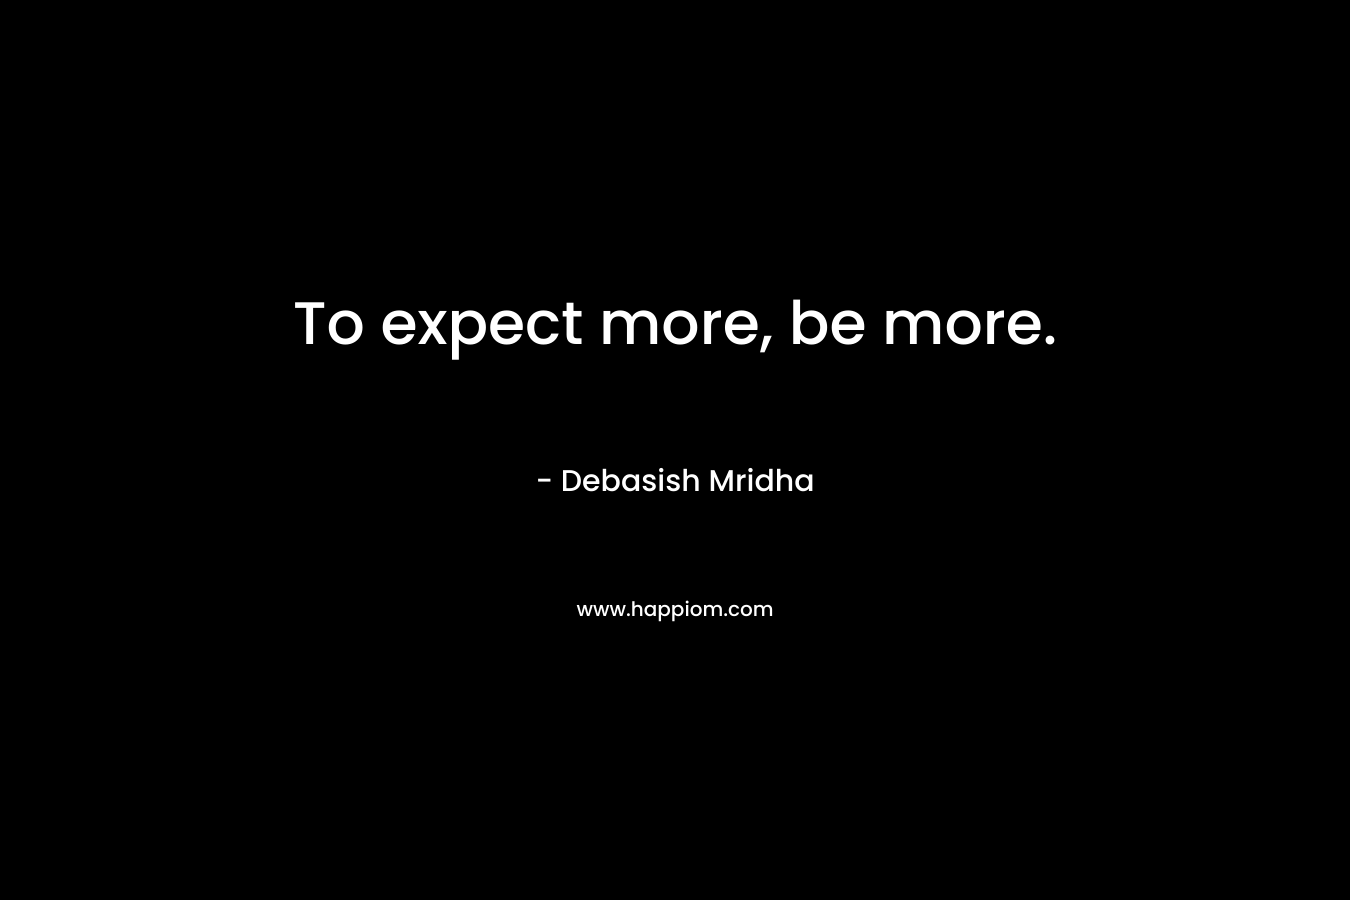 To expect more, be more.